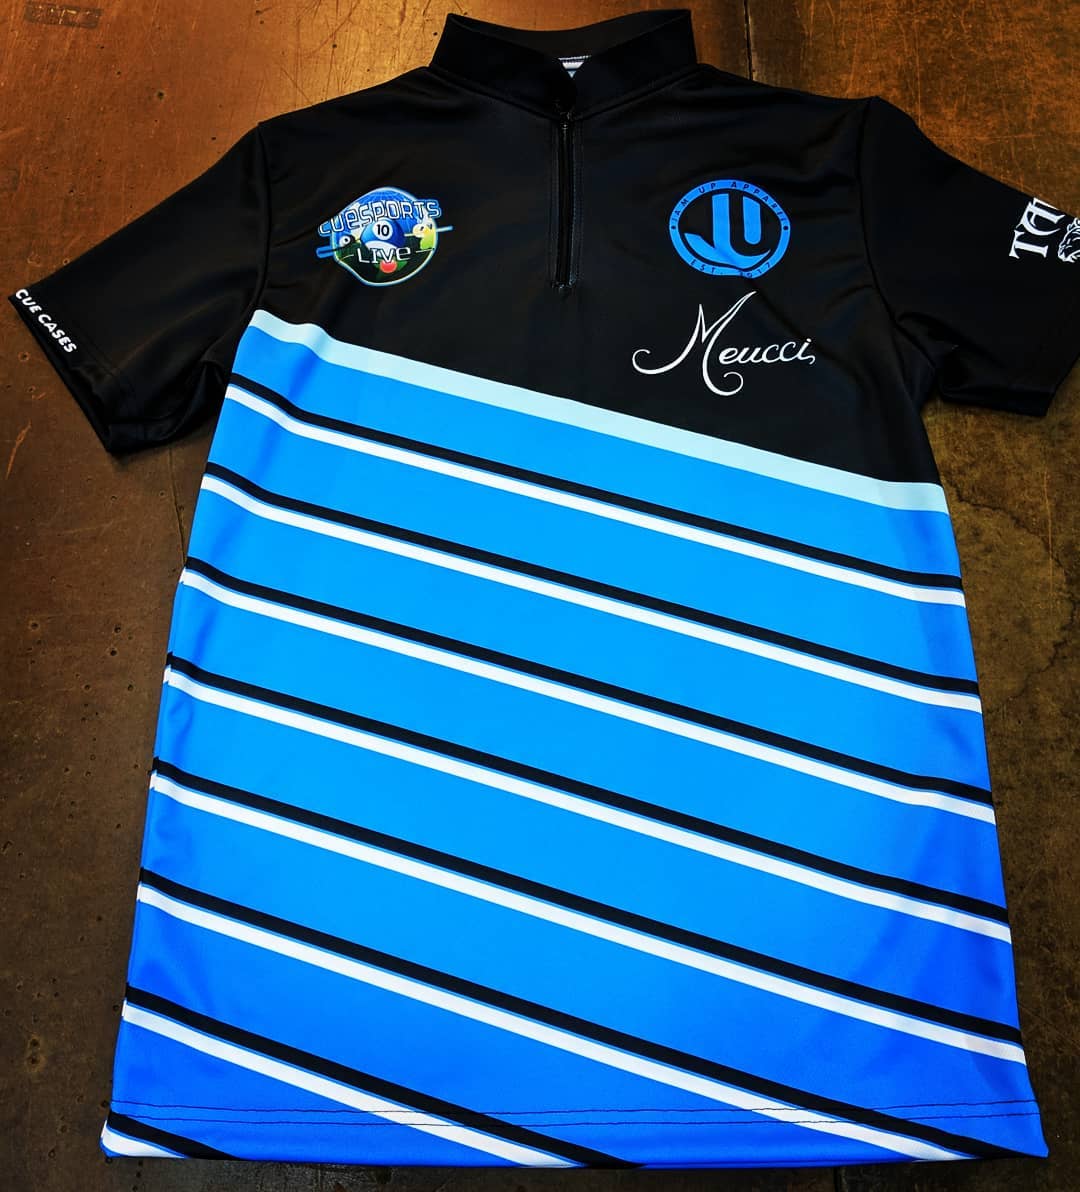 Fashionable sublimation polo shirt with unique graphics